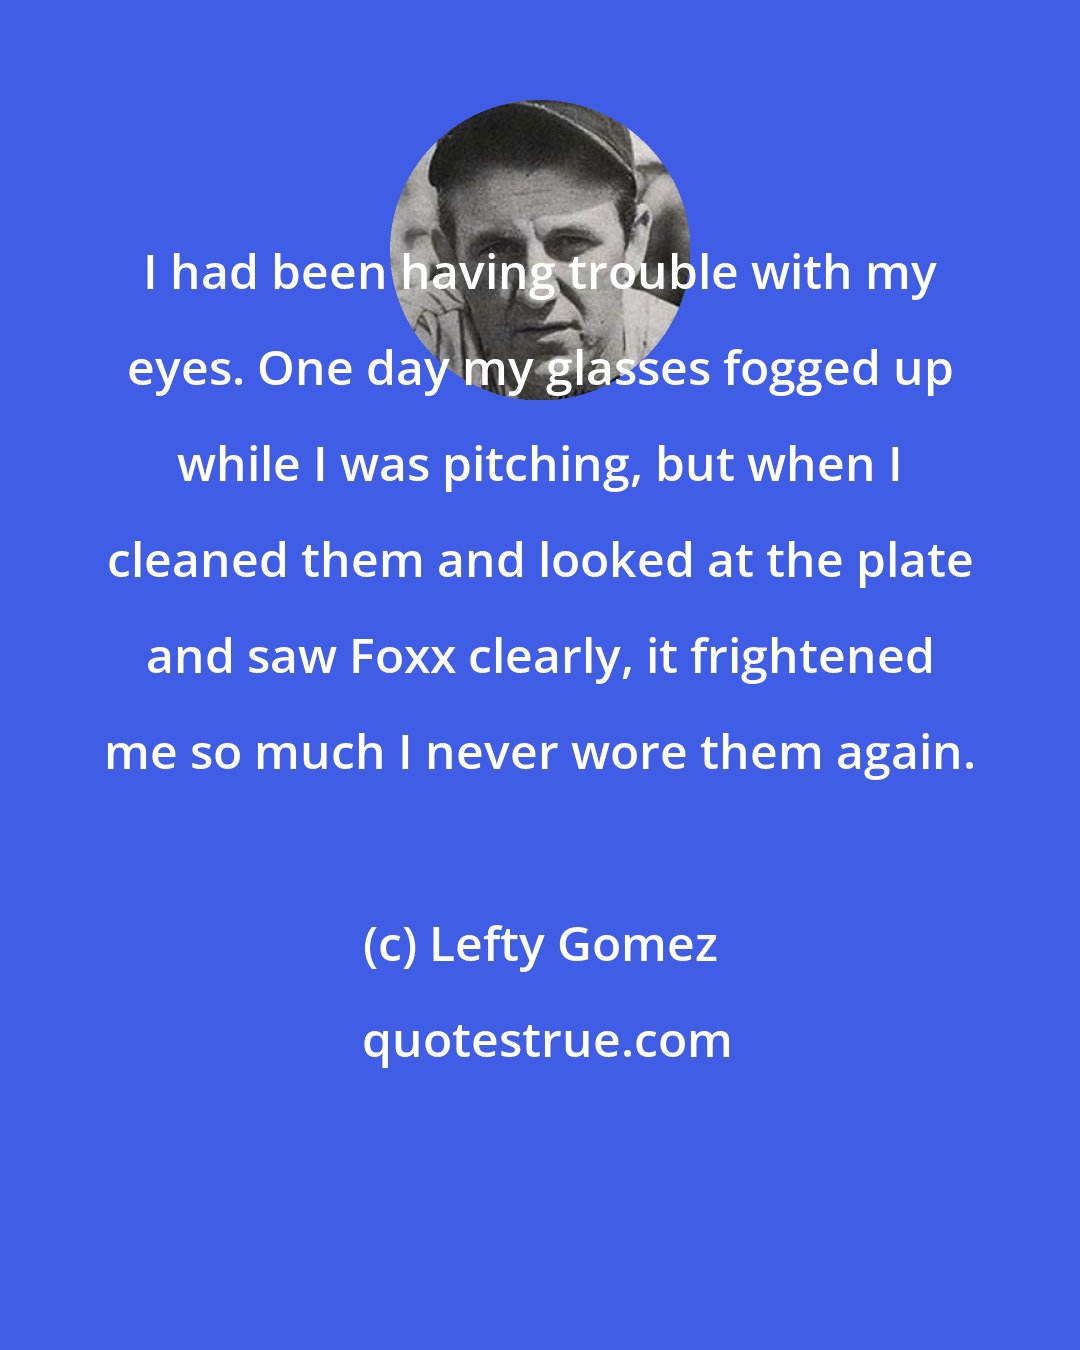 Lefty Gomez: I had been having trouble with my eyes. One day my glasses fogged up while I was pitching, but when I cleaned them and looked at the plate and saw Foxx clearly, it frightened me so much I never wore them again.